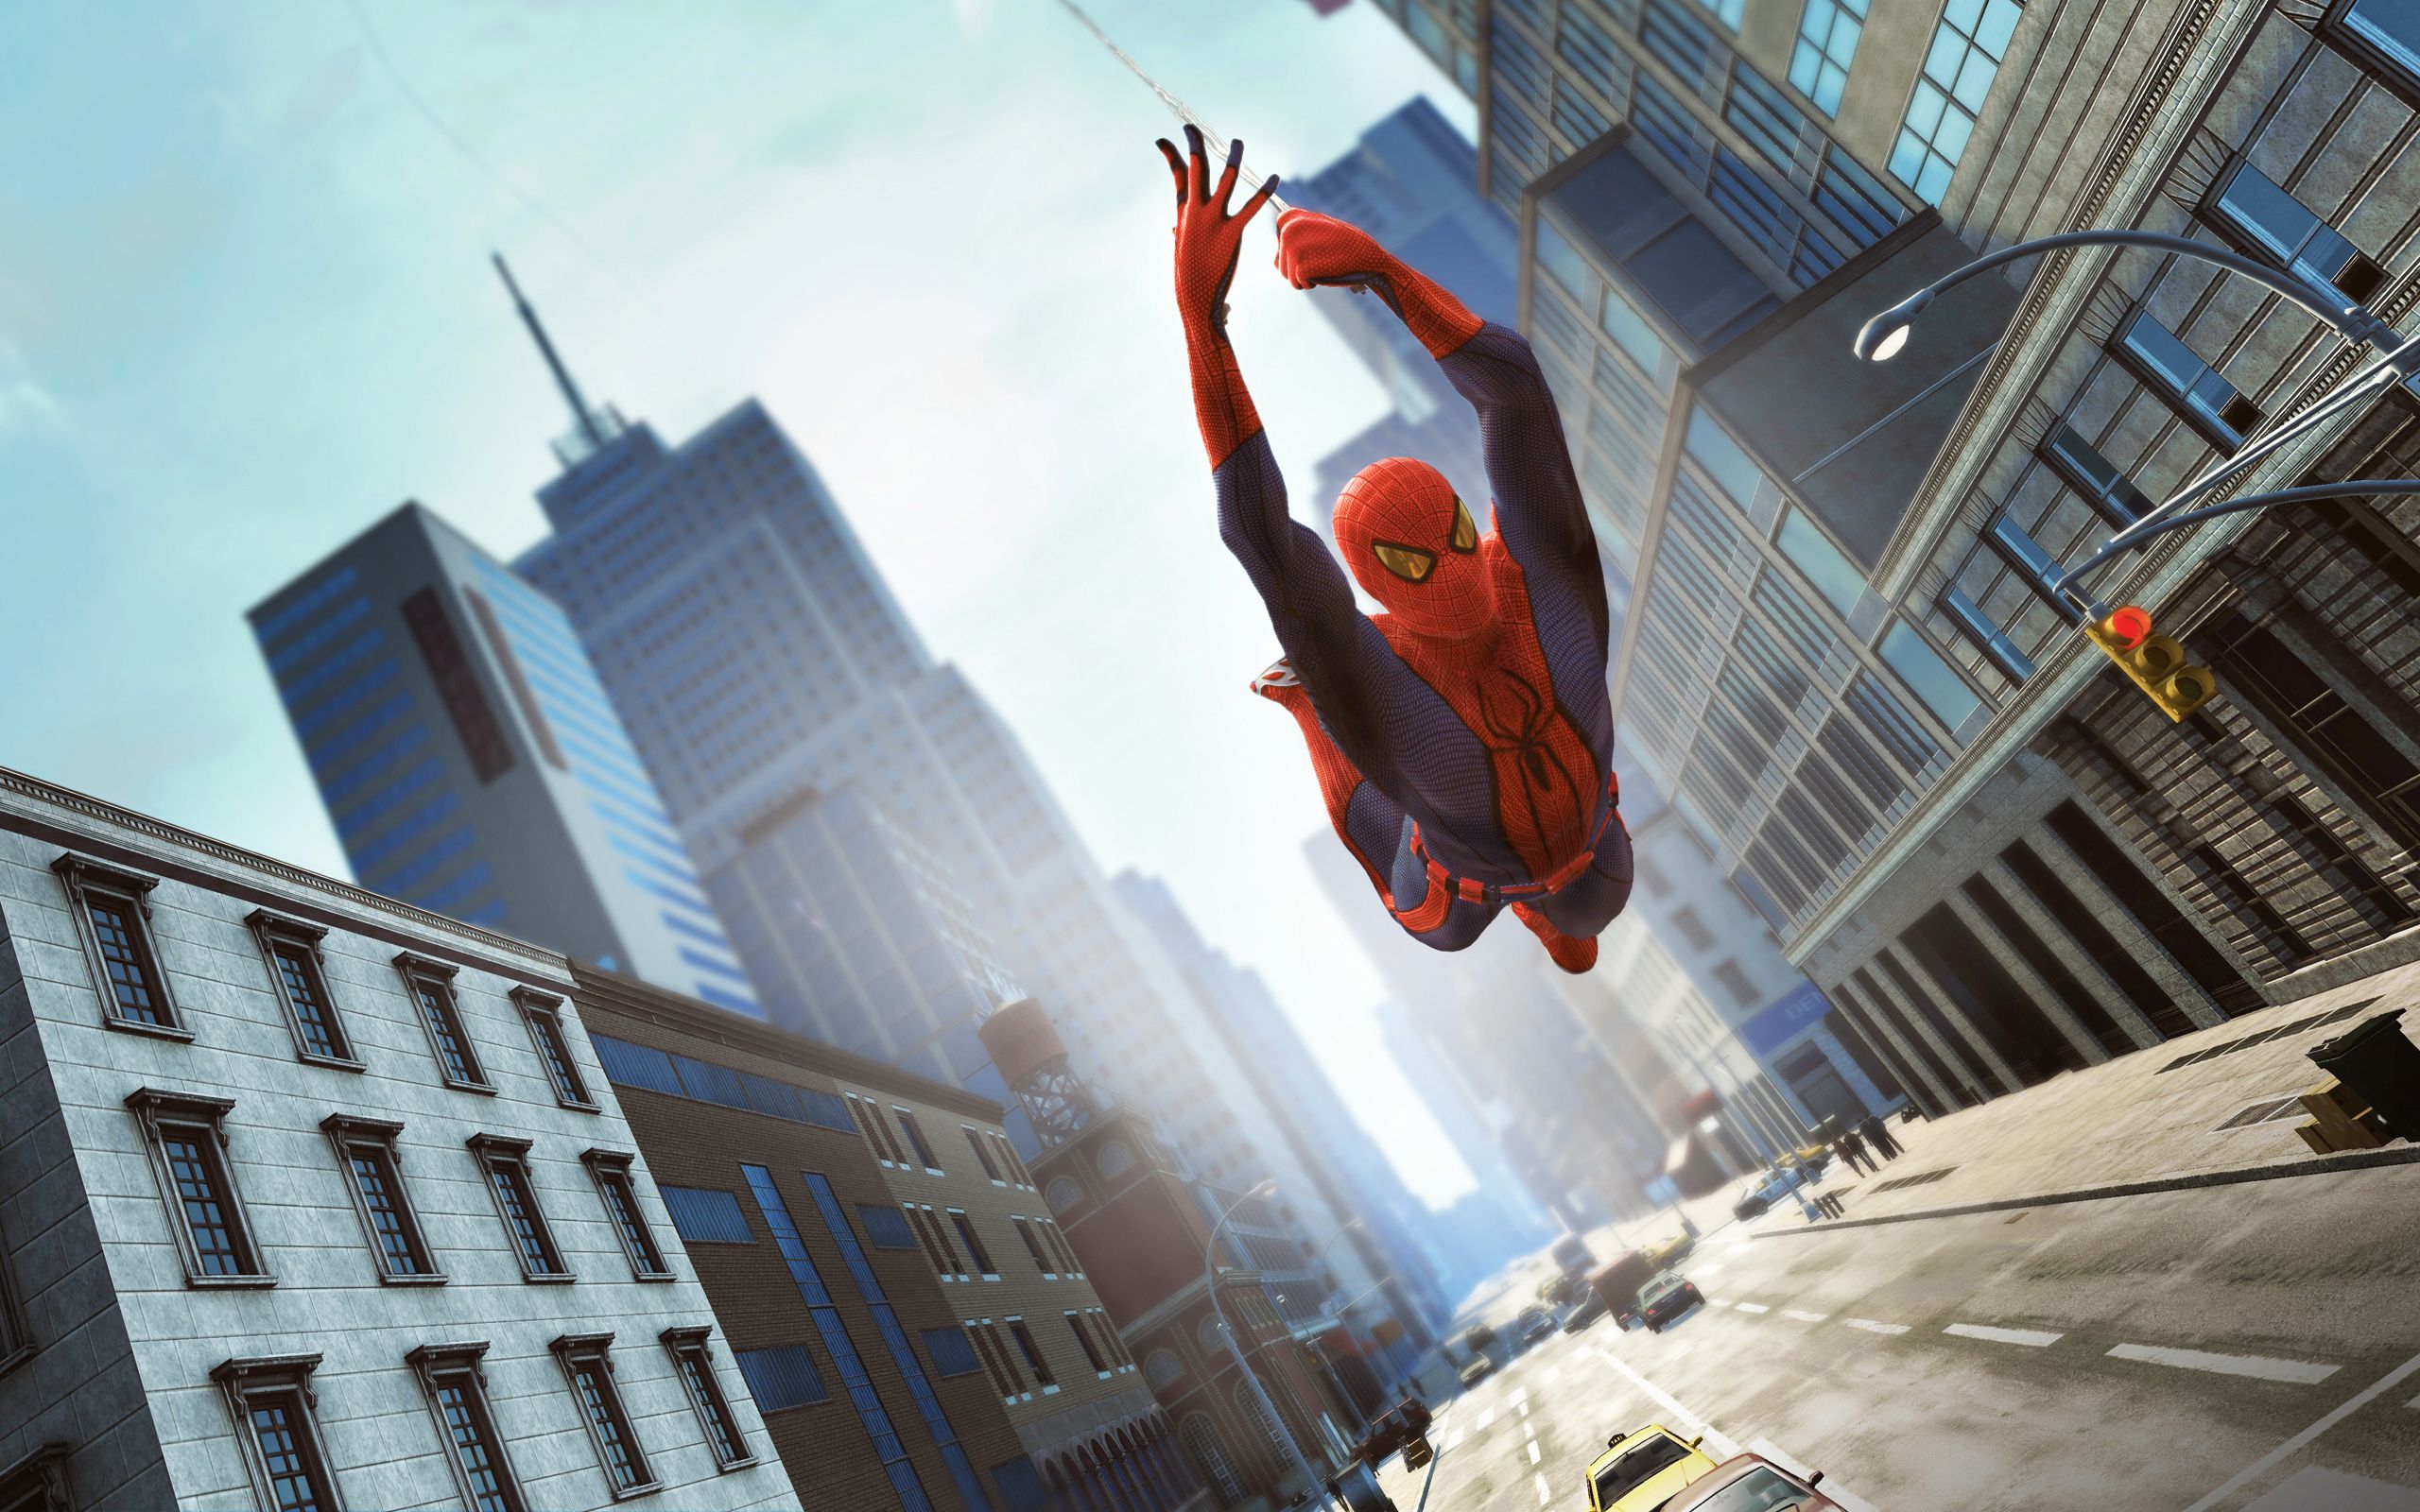 The Amazing Spider Man Video Game HD Wallpaper - iHD Wallpapers